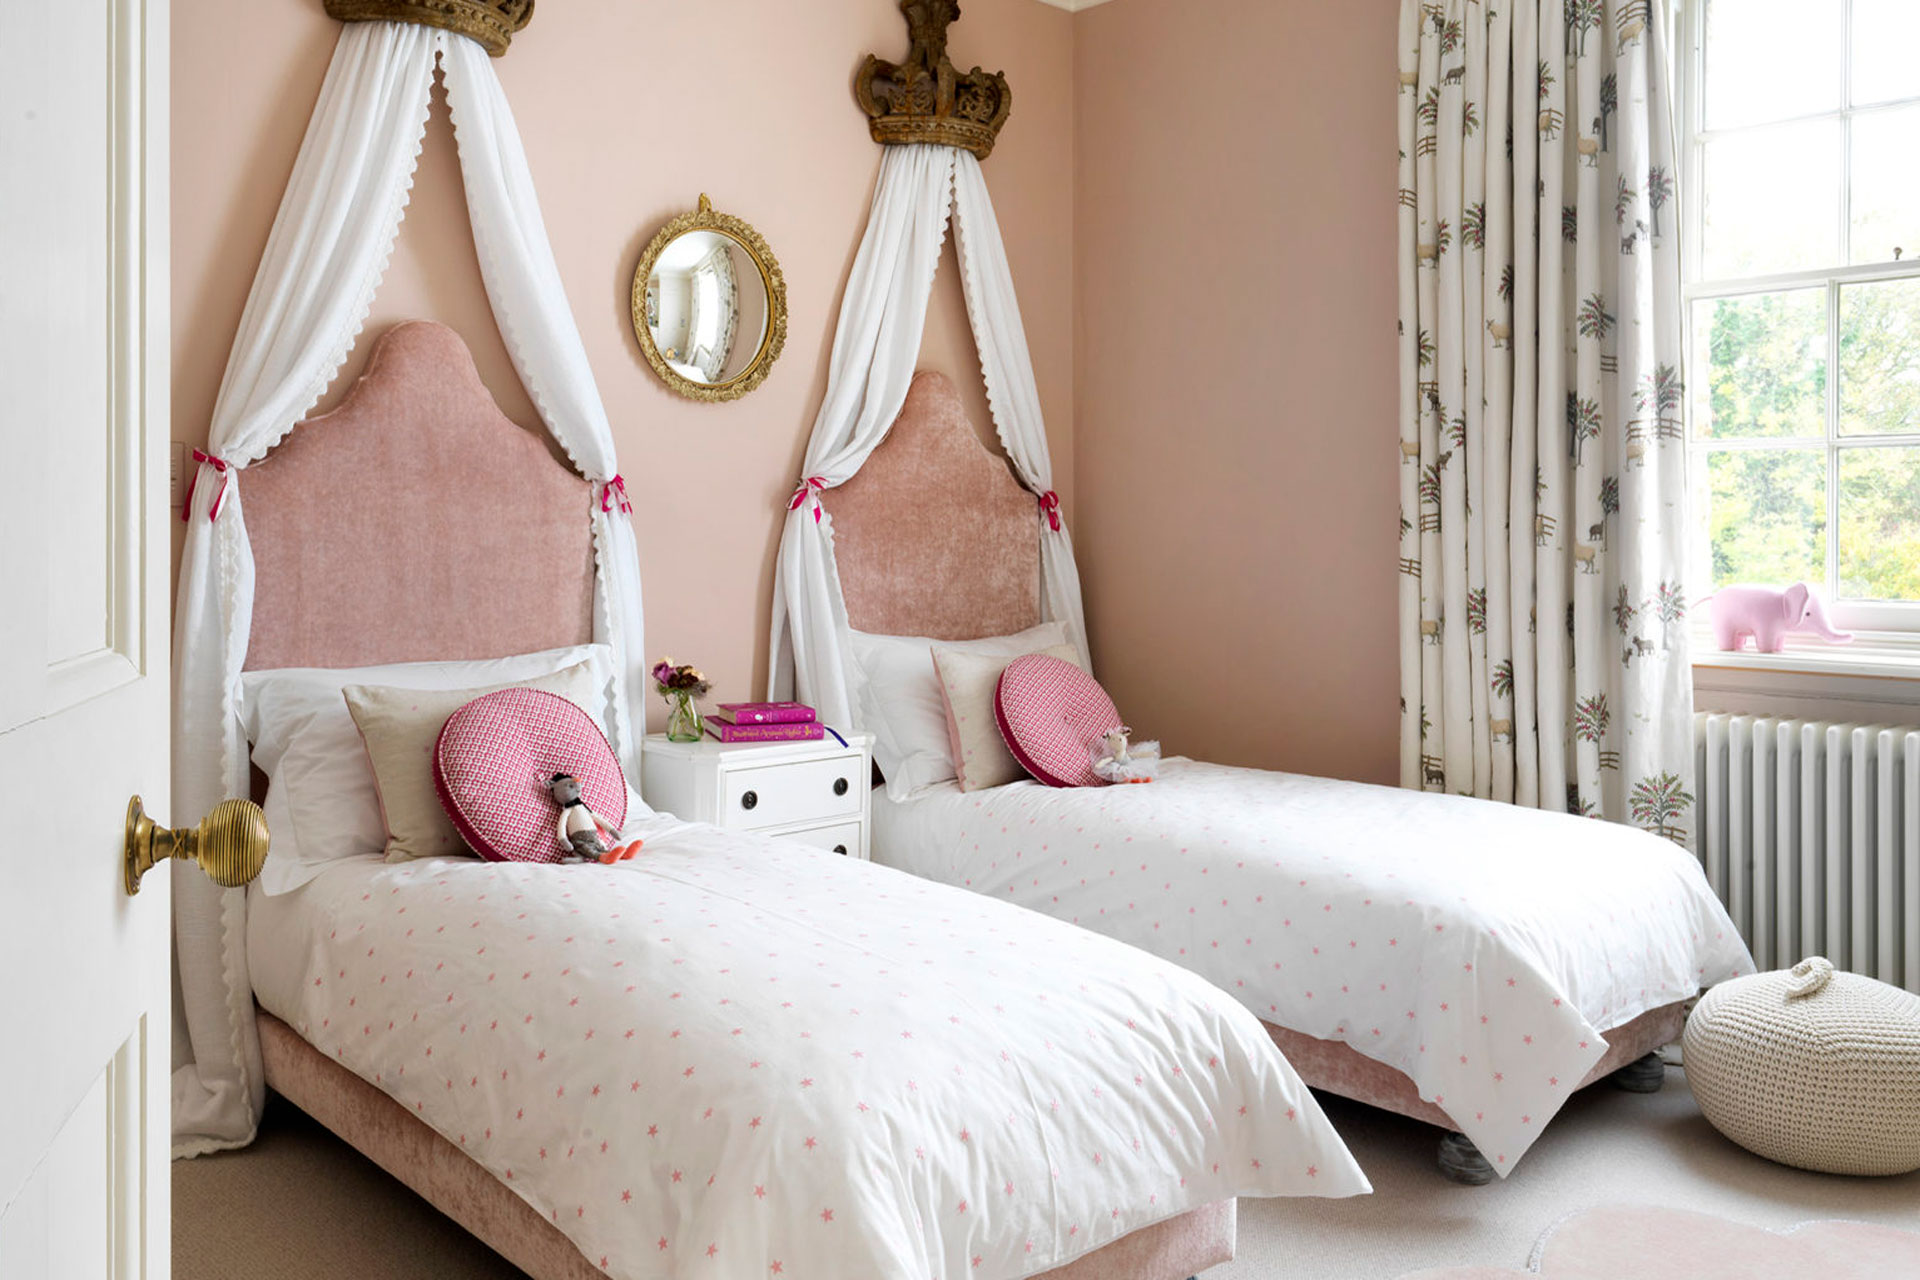 a twin spare room with canopies over the beds and pink walls